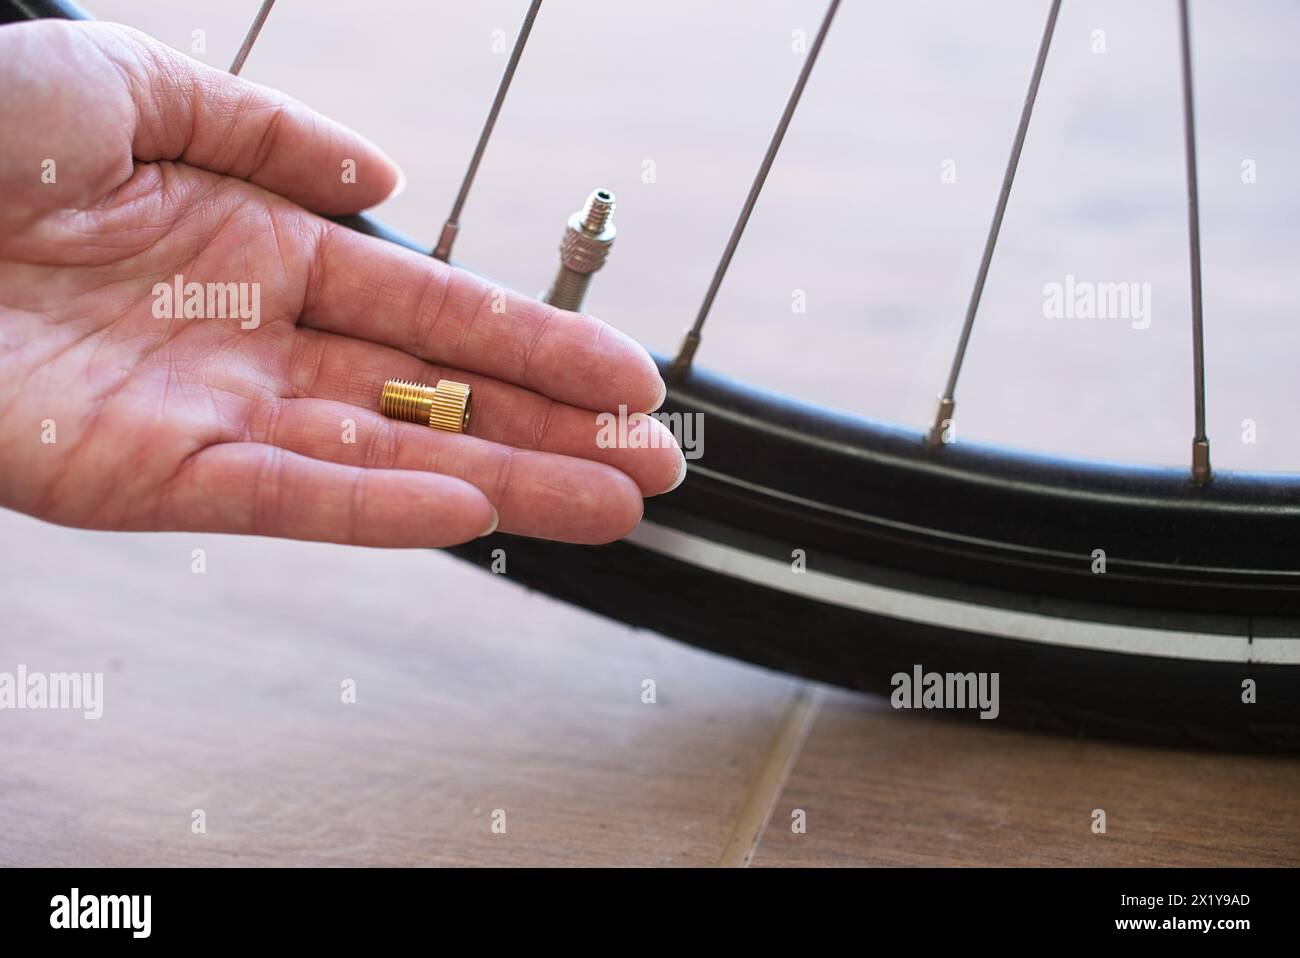 Close-up view of a bicycle tire valve adapter resting on the flat hand of a person. In the background, a partial view of a bicycle tire with a valve. Stock Photo